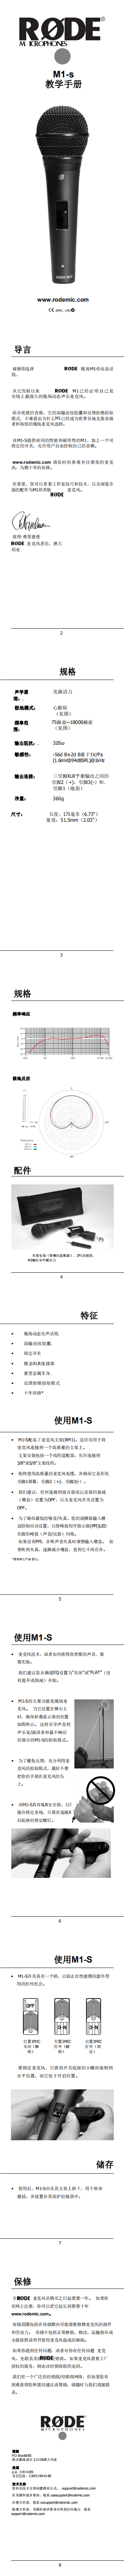 M1-s_product_manual_translate_Chinese_0.png